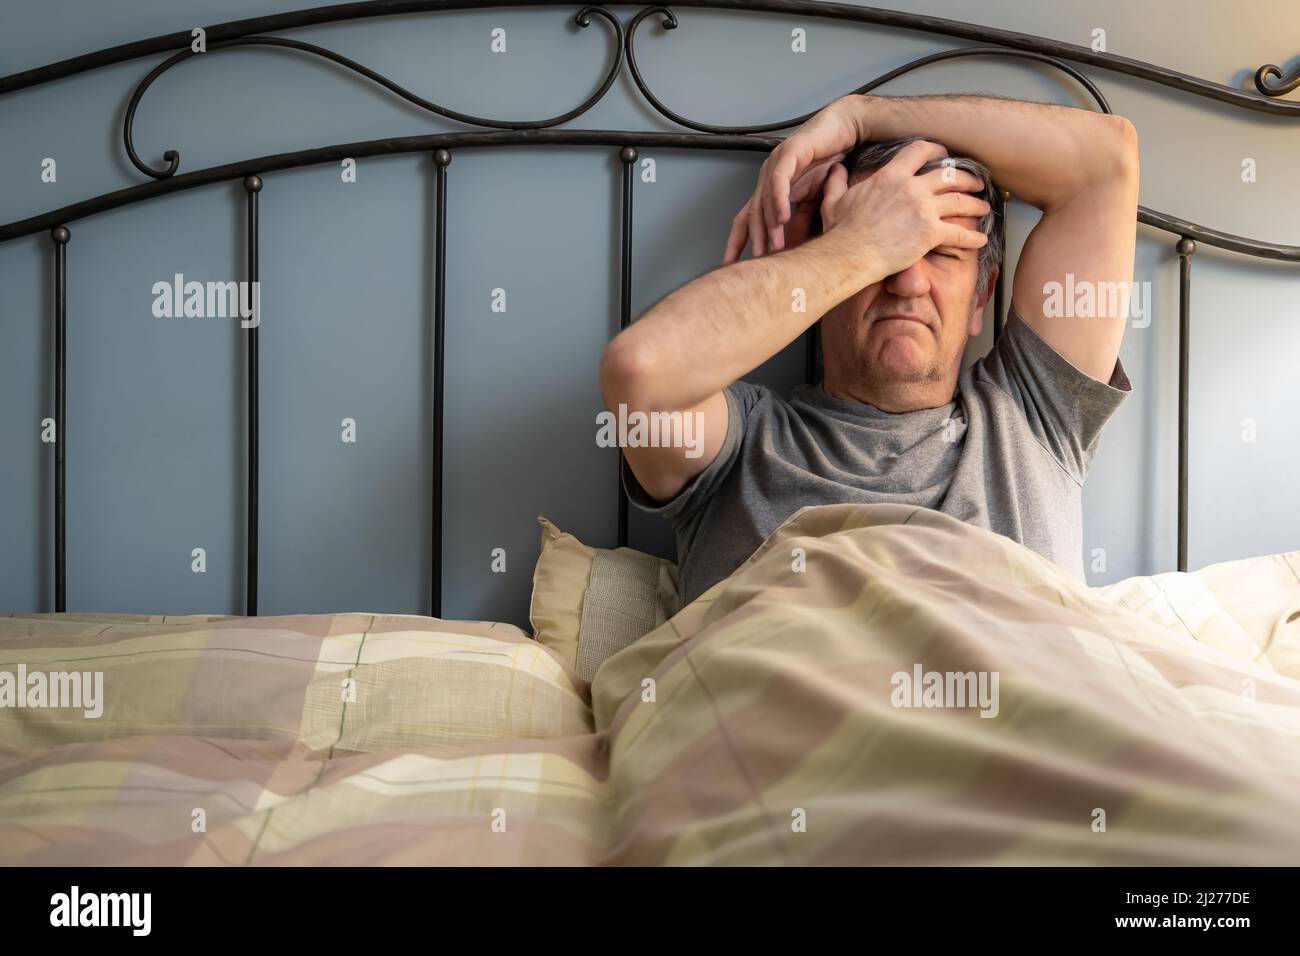 Man with insomnia sitting on the bed and with a gesture of despair. Stock Photo